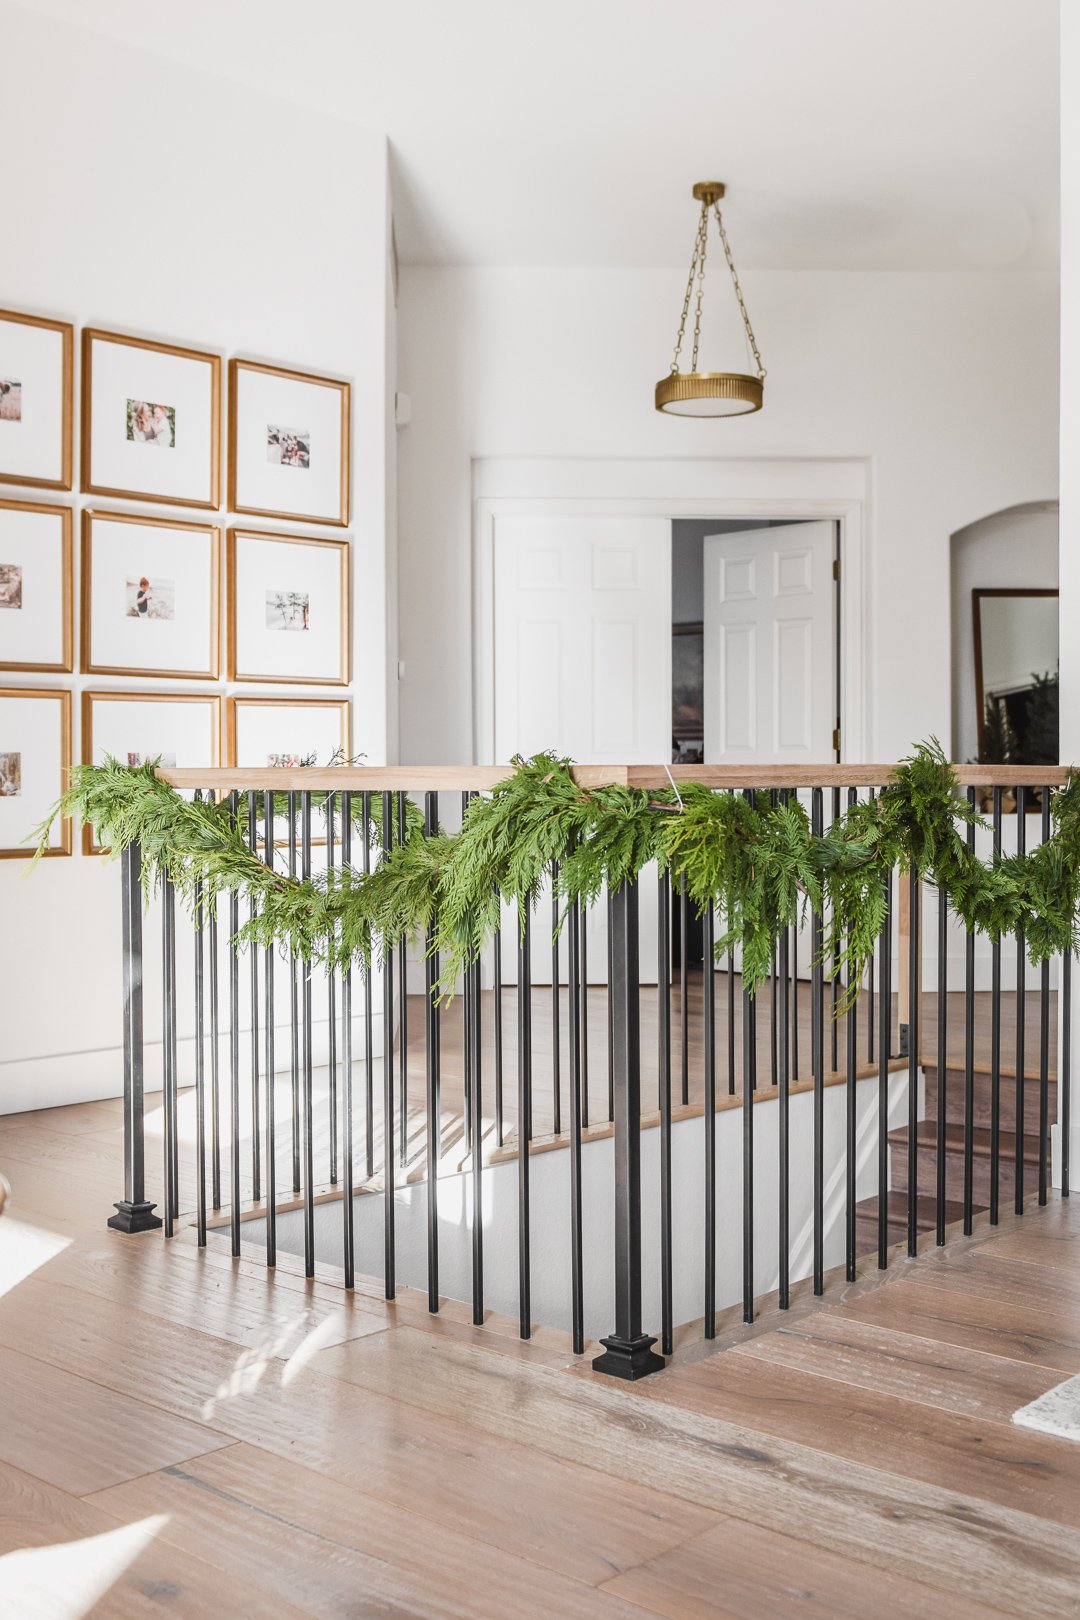 Staircase Ideas & Trends for 2023 - Incl. Railings Banisters